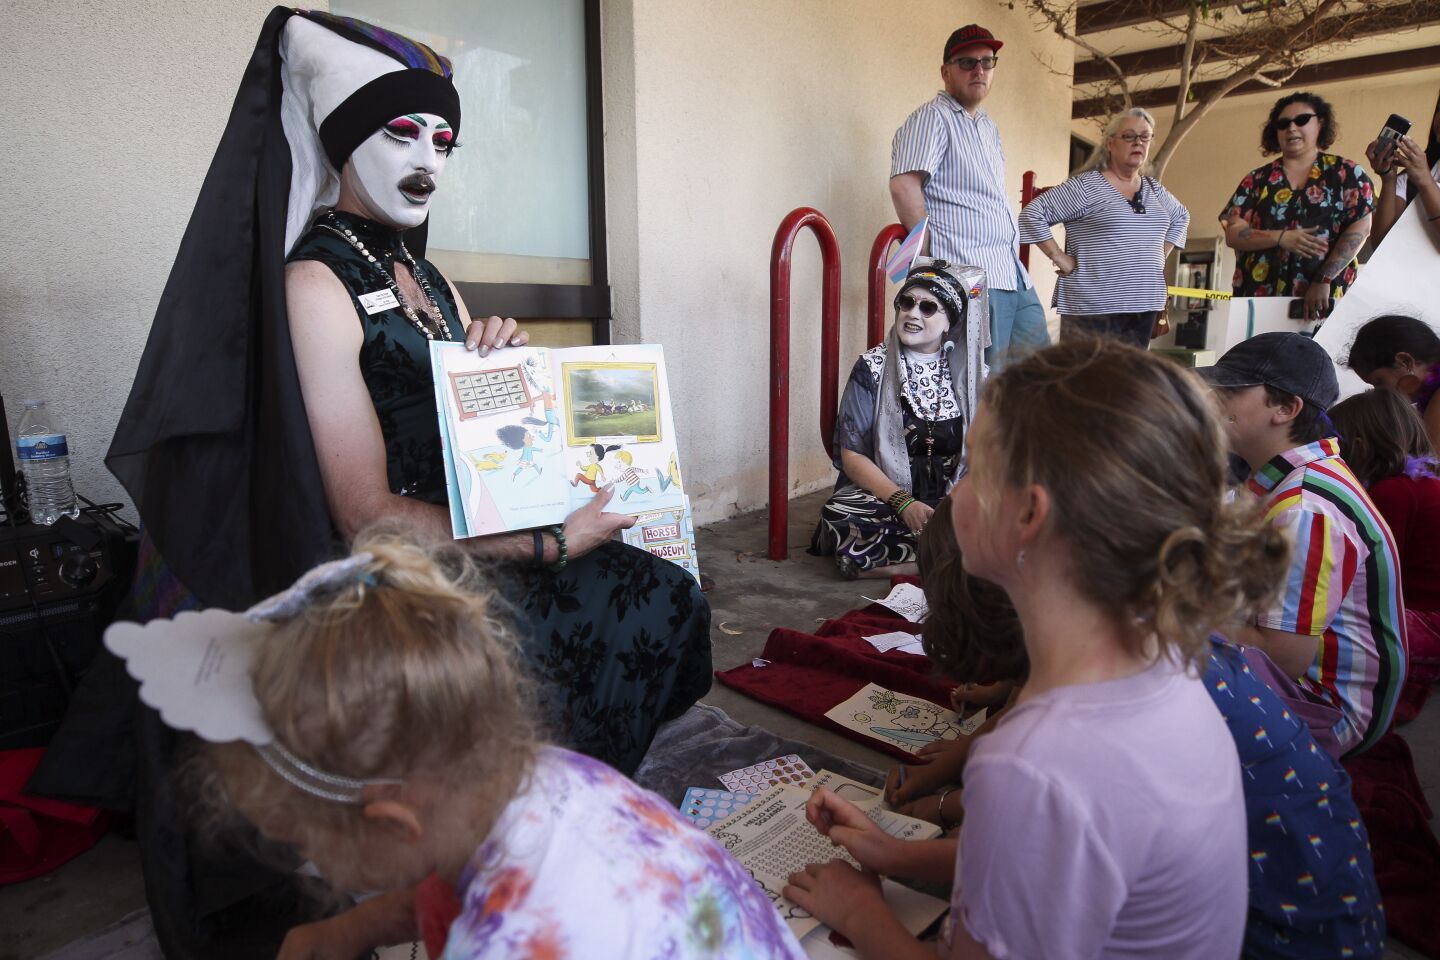 Sister Rita Booke, with the San Diego Sisters of Perpetual Indulgence, reads a book to children outside of the Chula Vista Public Library, Civic Center Branch, on Tuesday, September 10, 2019 in Chula Vista, California.